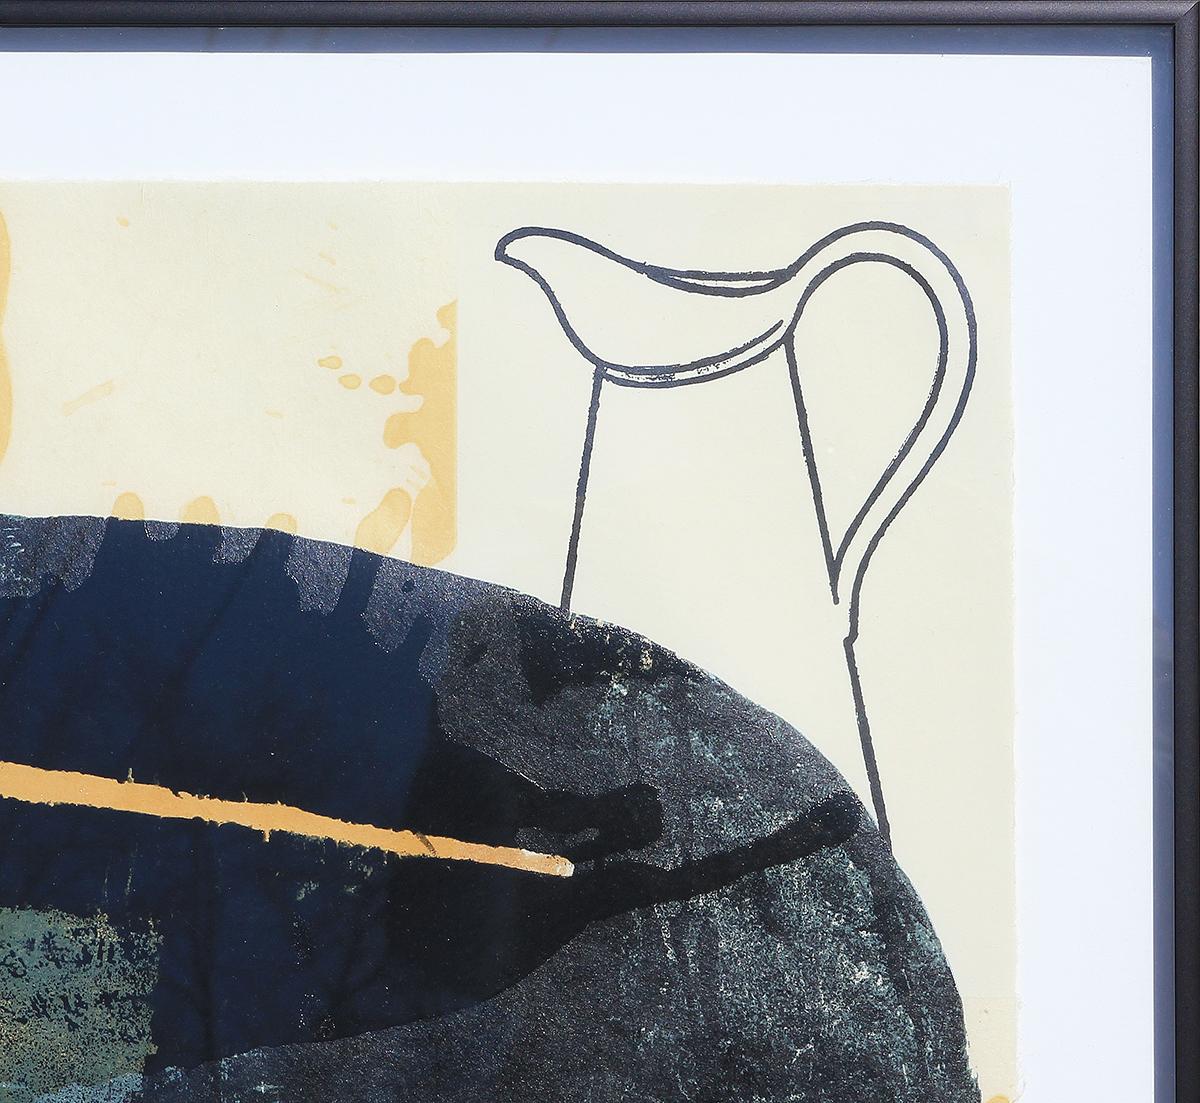 Surreal contemporary silkscreen on Korean Kozo paper of a man next to a floating onion by New York artist Donald Baechler. Part of a series of works incorporating male portraits and onions, this piece incorporates line drawings of a pitcher and a